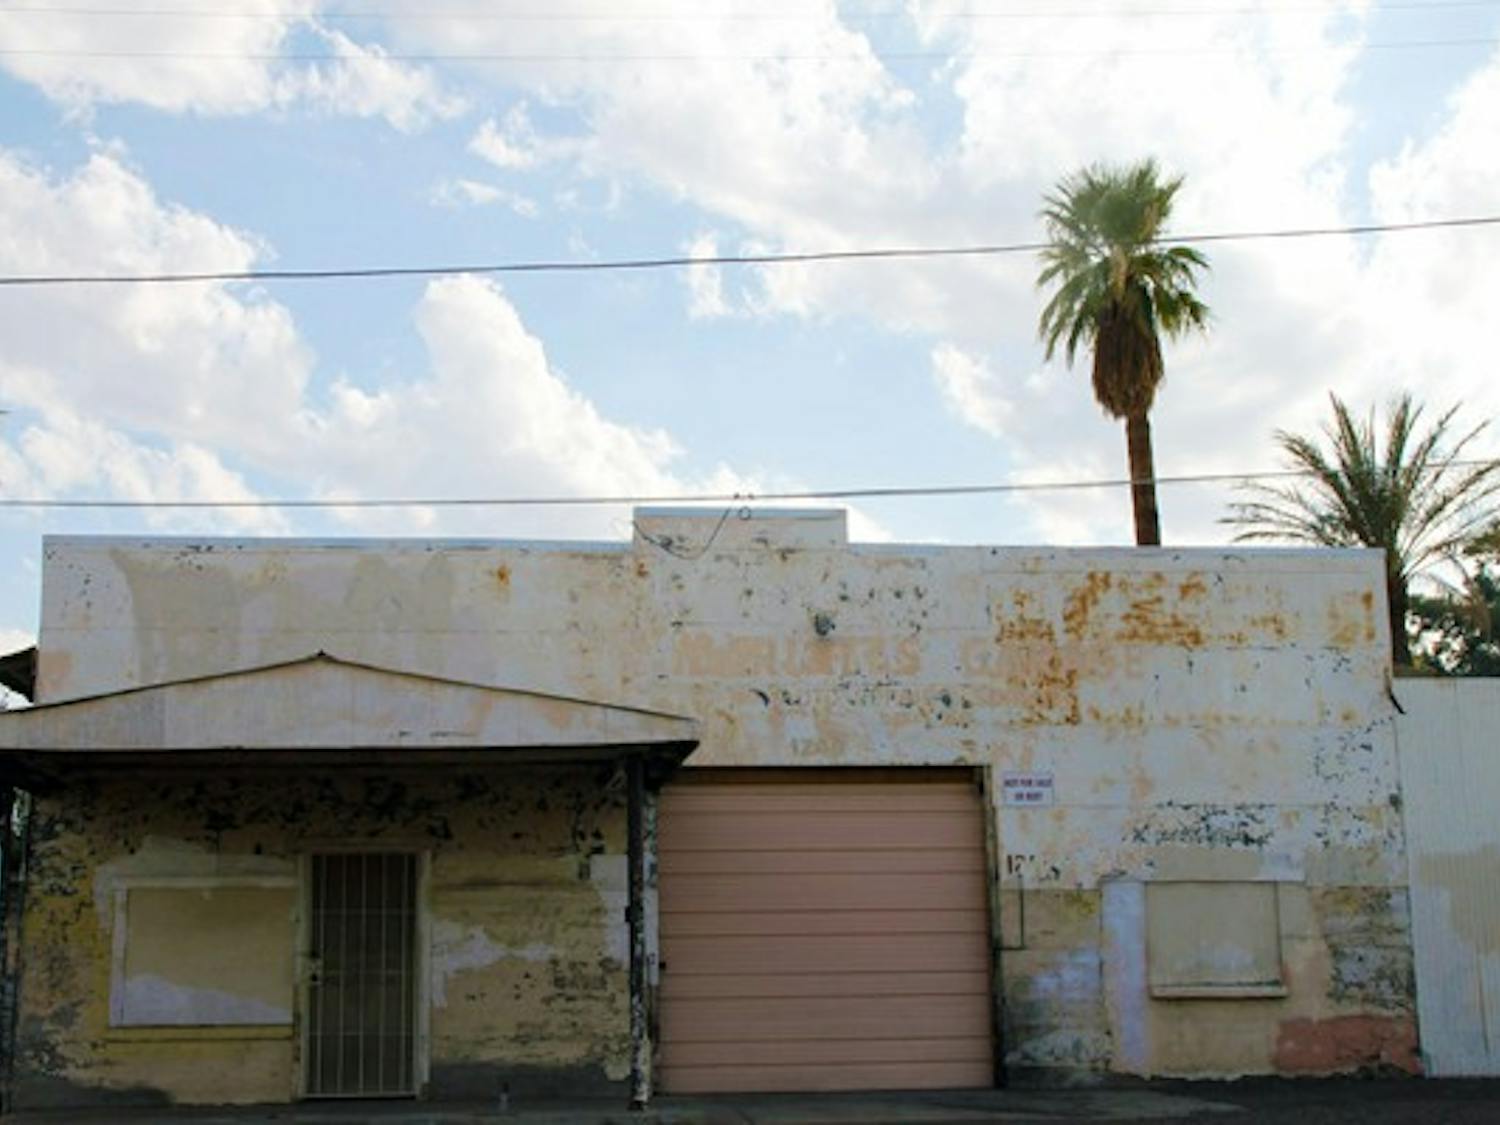 FALLING APART: The Tempe City Council leaders are discussing the possibility of renovating and revamping storefronts around Apache Blvd. (Photo by Rosie Gochnour)